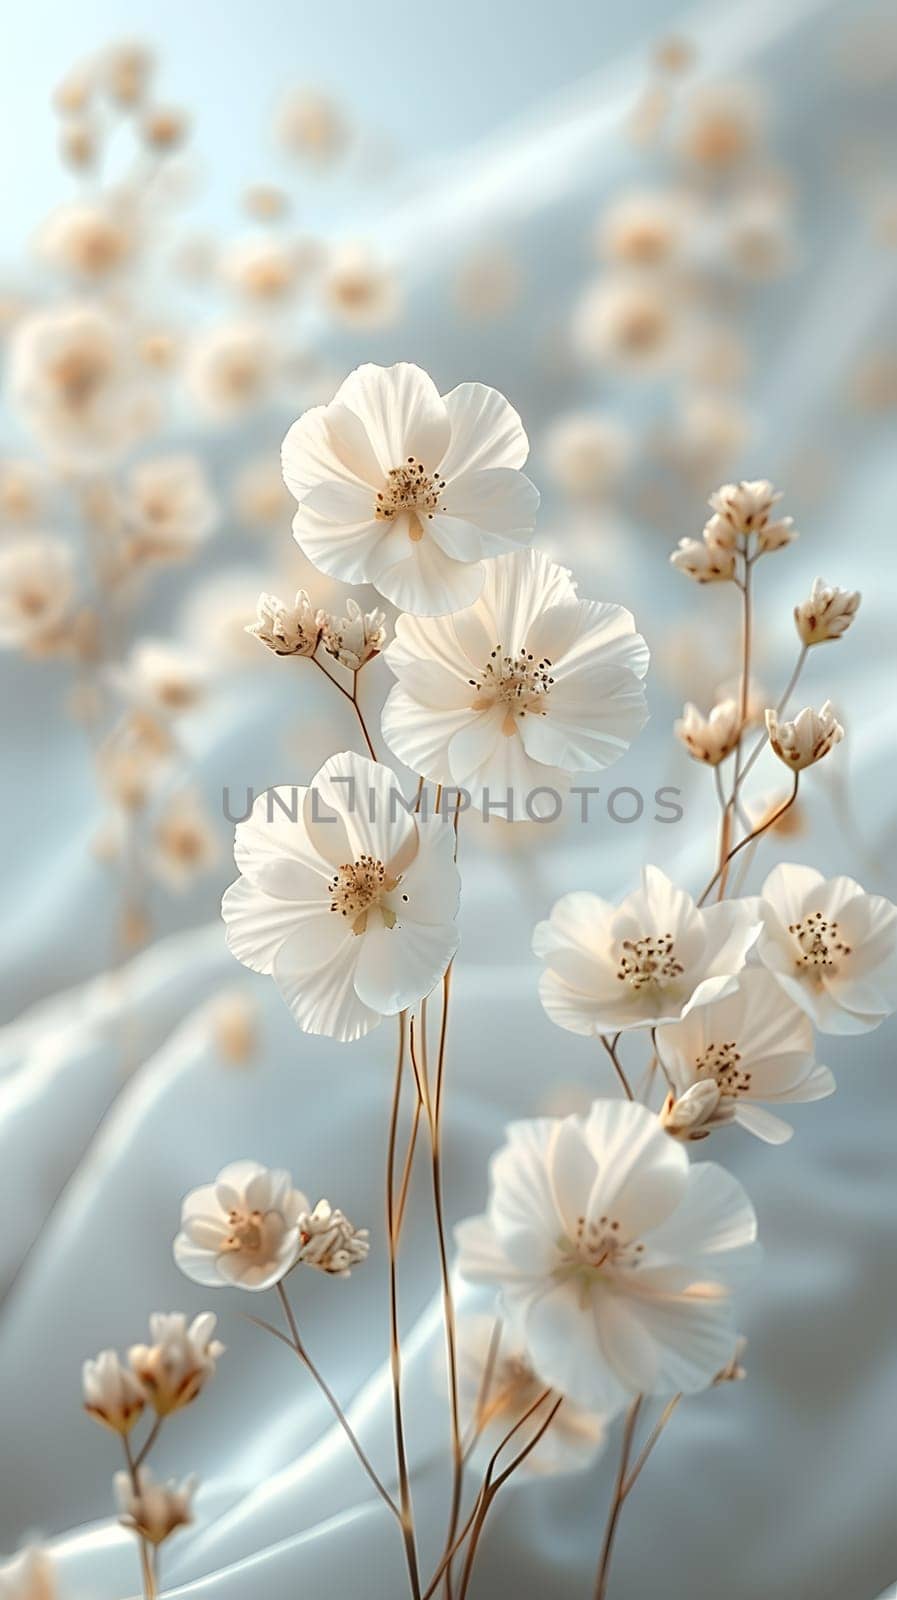 White flowers bloom on a cloth, showcasing their beauty by Nadtochiy